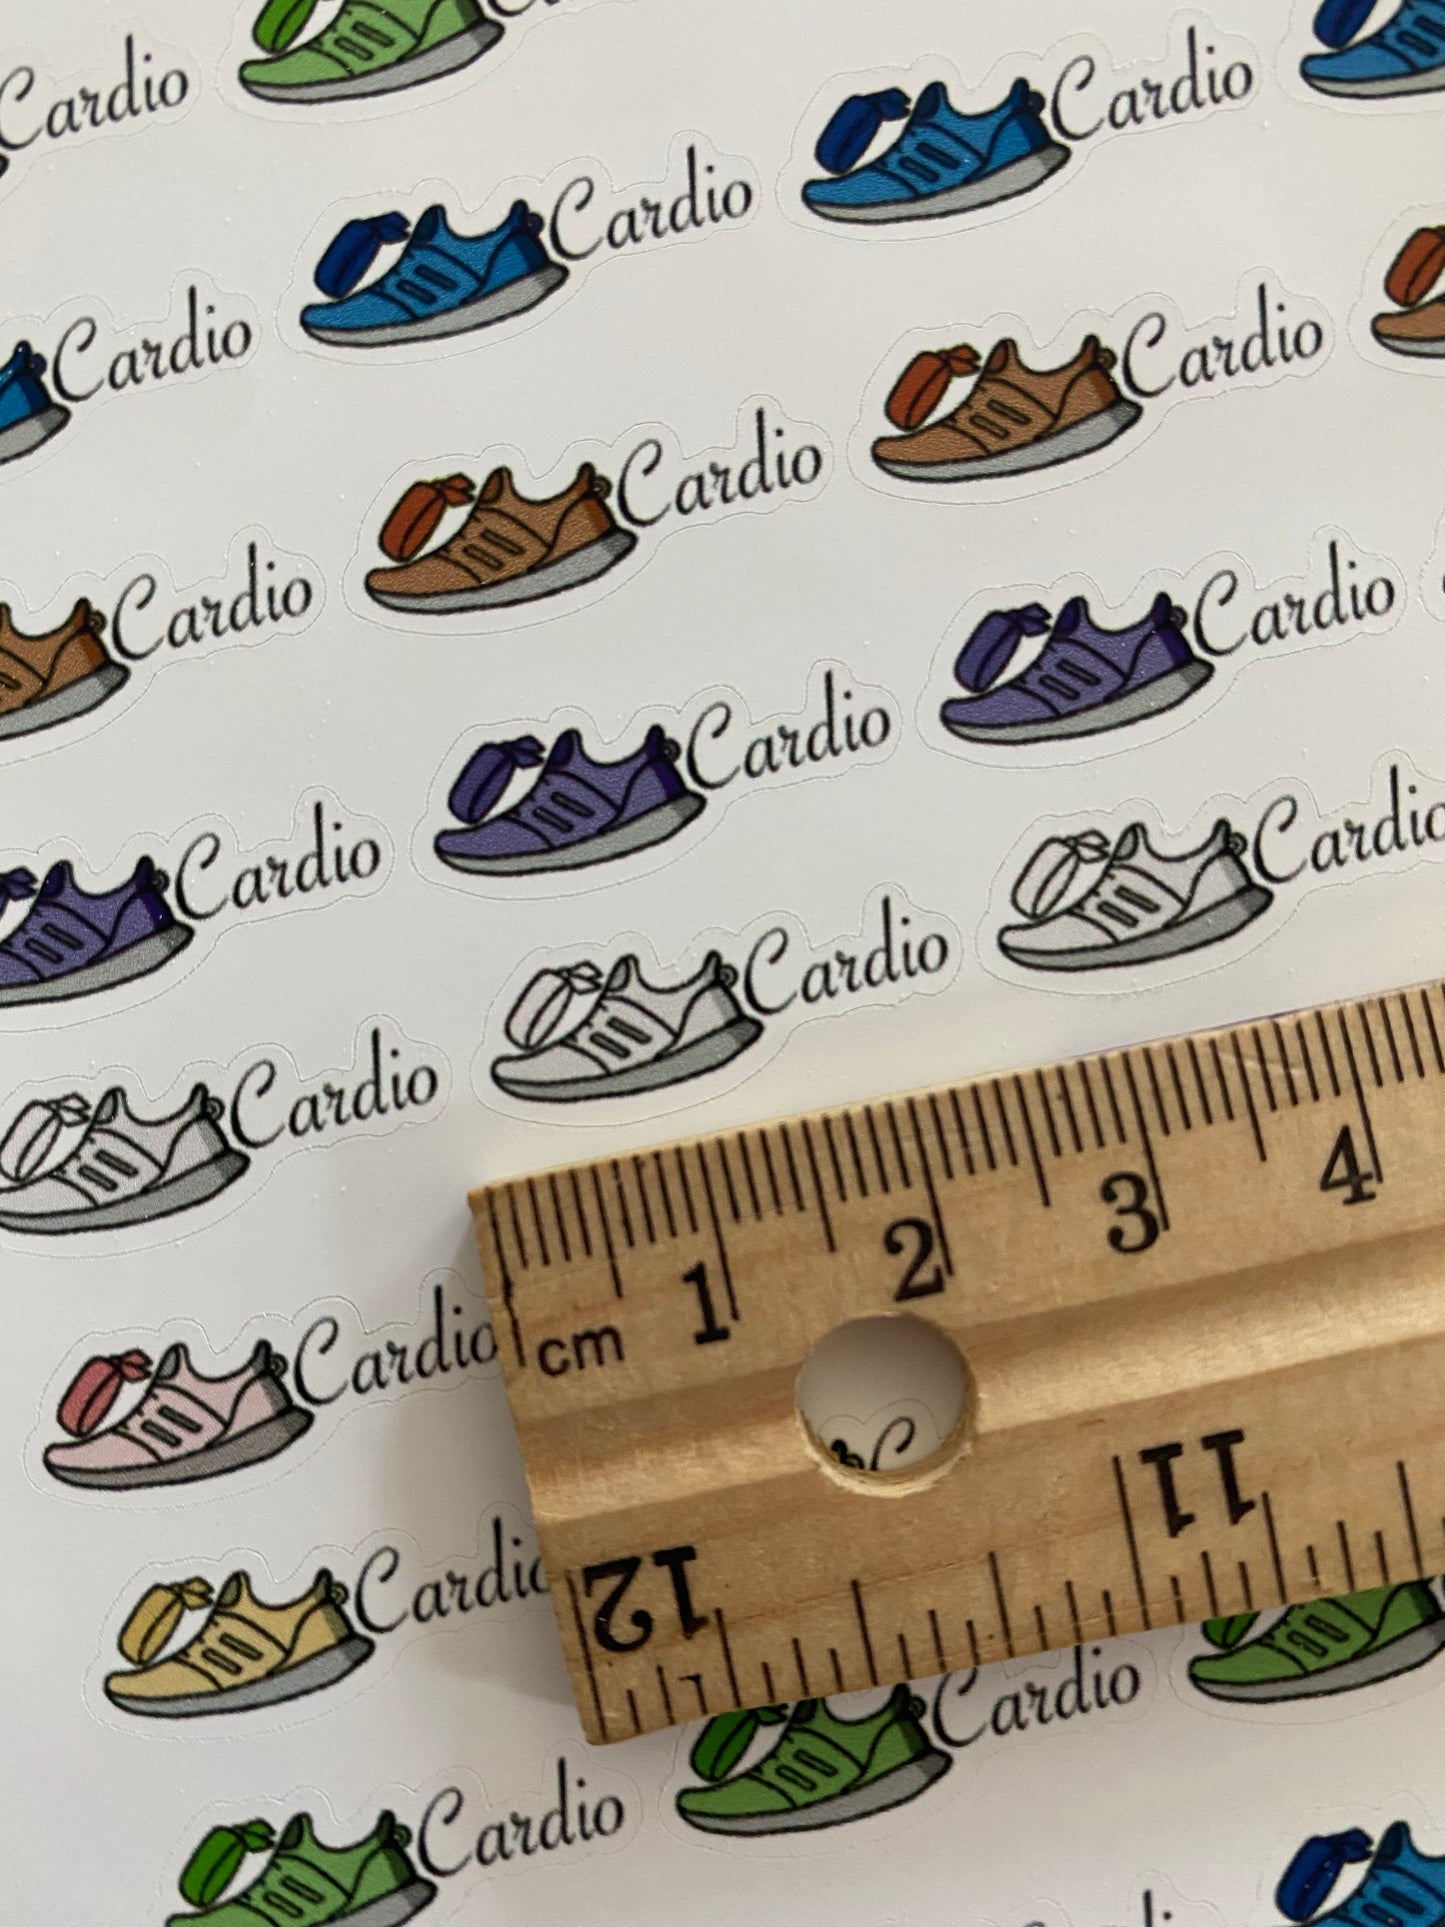 Cardio workout journal sticker with a ruler to show the size of each sticker